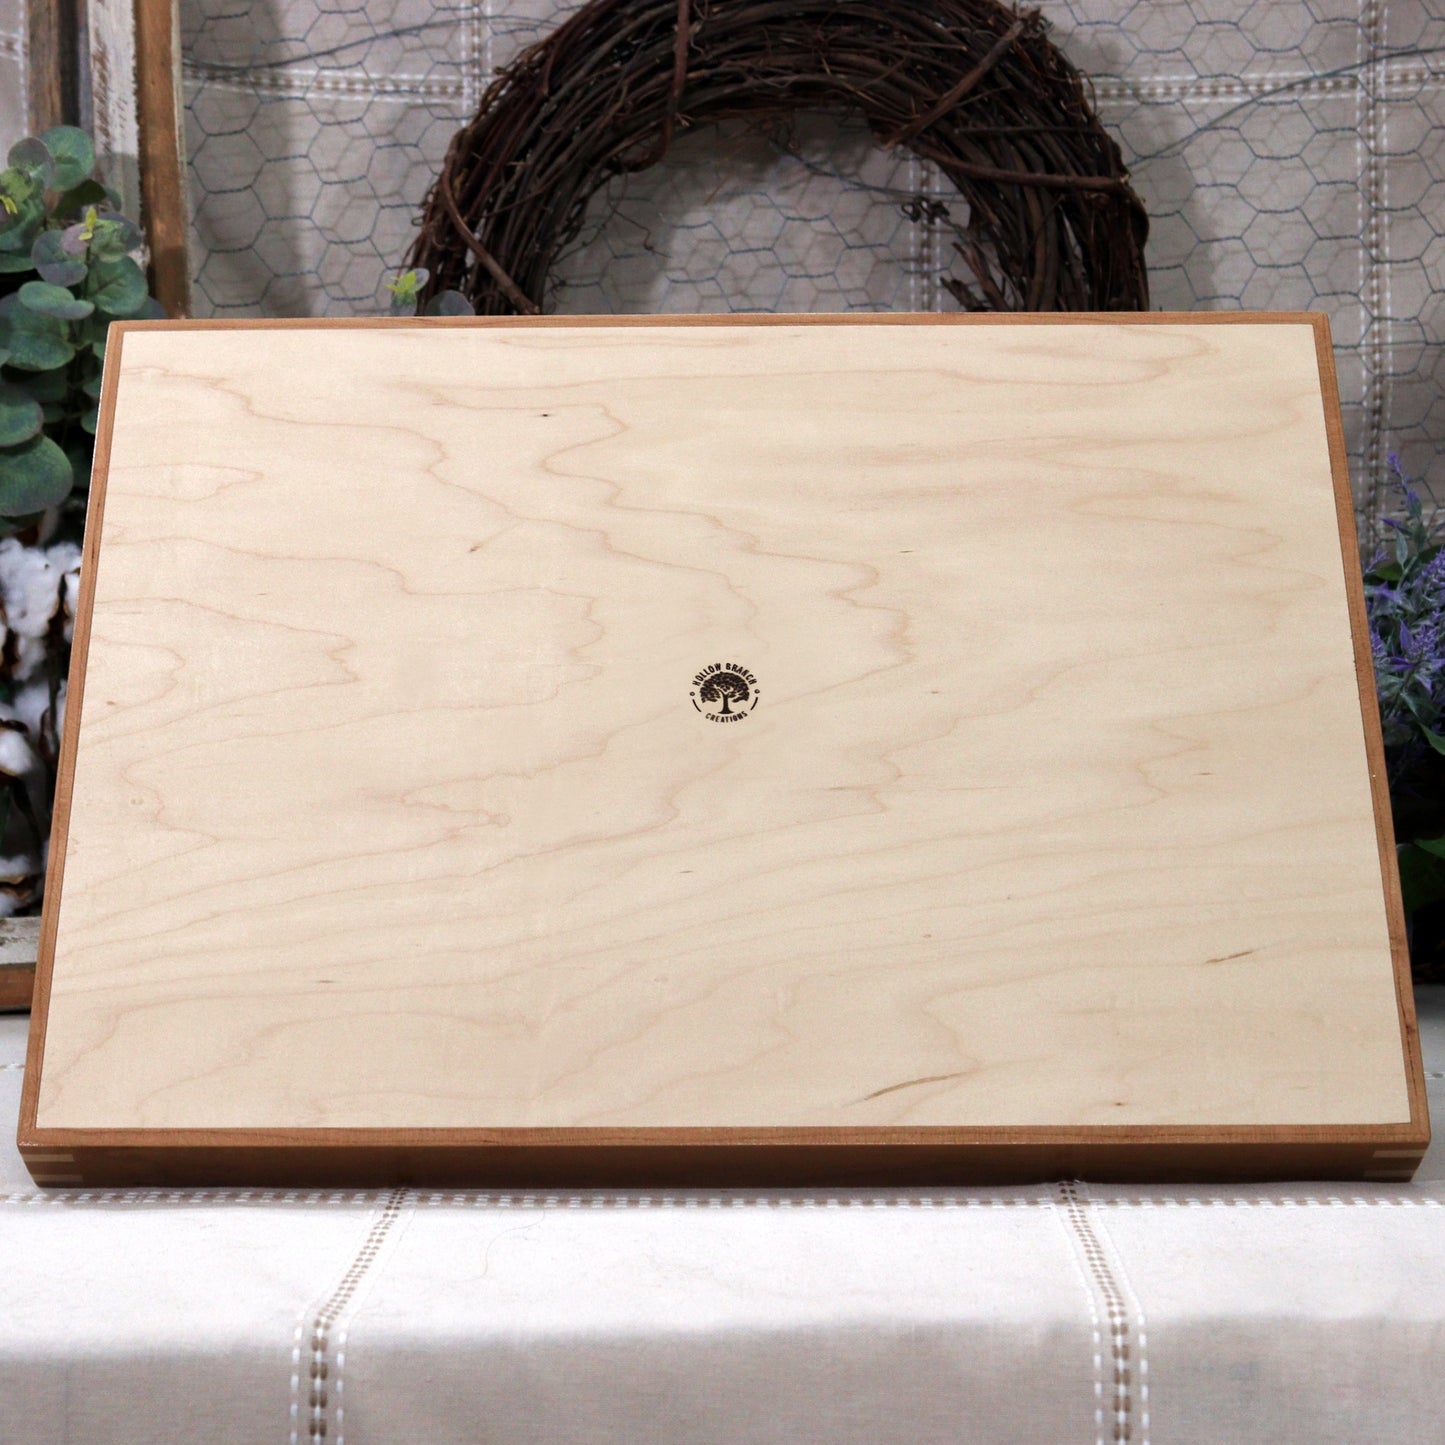 Cherry & Maple Wooden Serving Tray with Handles and Inlaid Corners - Affordable Unique Gift, Handmade in the USA